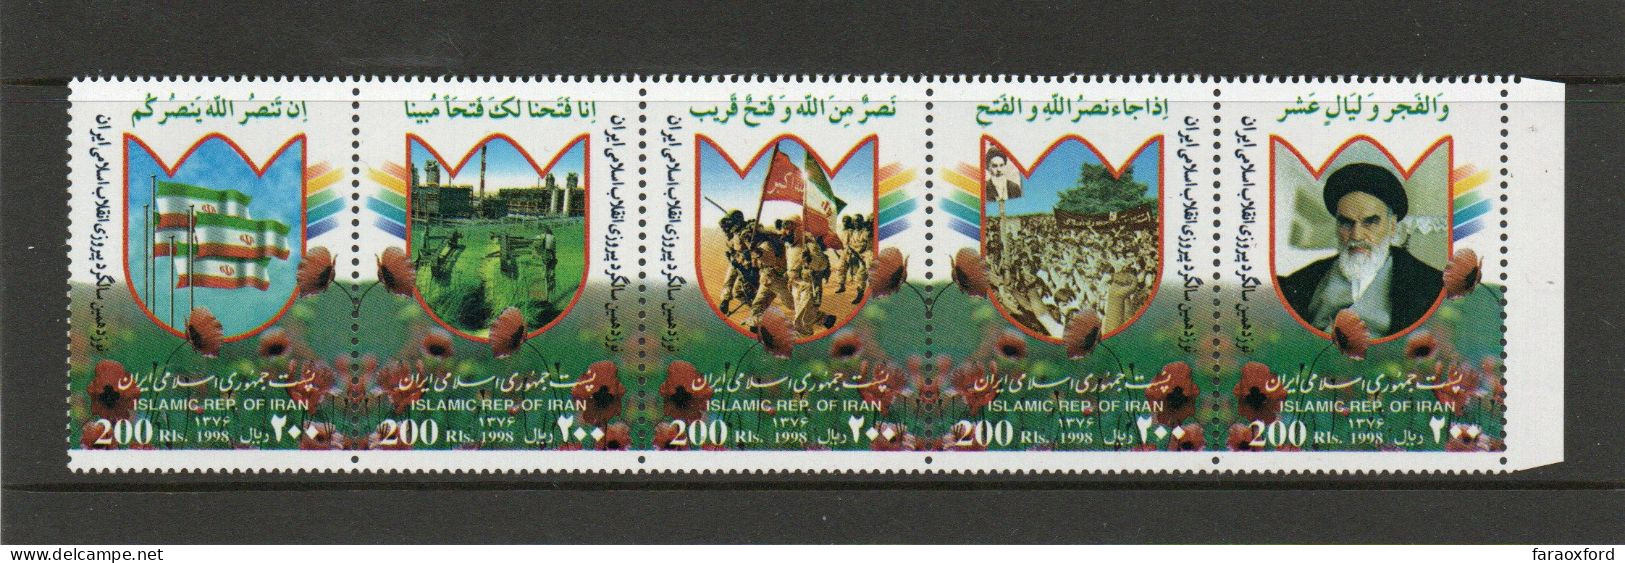 IRAN - ايران - PERSIA - 1998 - ISLAMIC REVOLUTION - COMPLETE SET OF STAMPS - MINT NOT HINGED - Irán